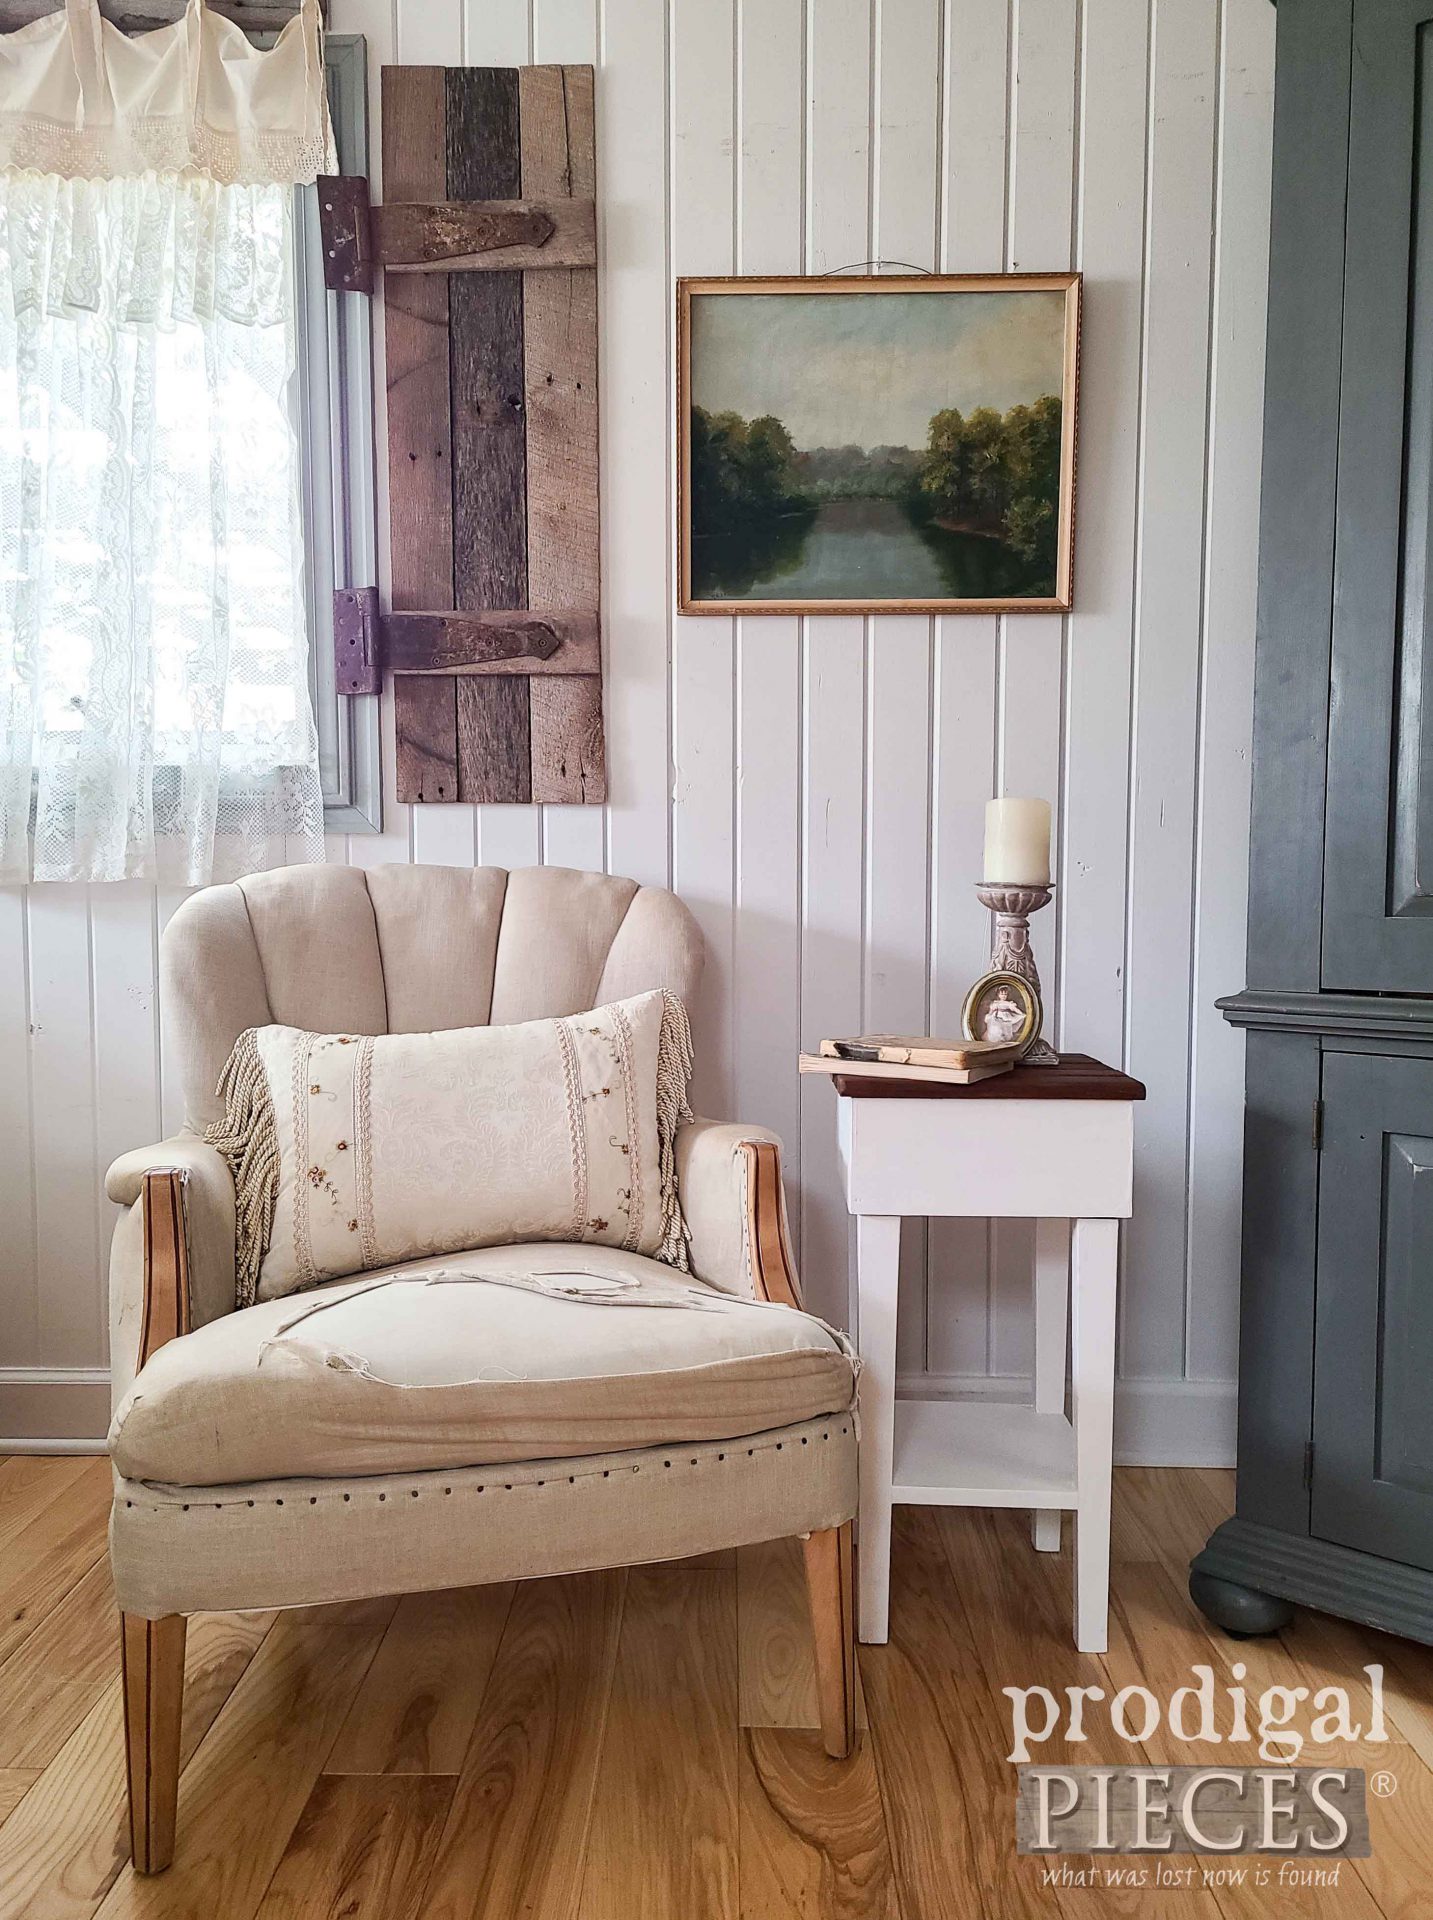 DIY Chair with Farmhouse Side Table by Larissa of Prodigal Pieces | prodigalpieces.com #prodigalpieces #farmhouse #furniture